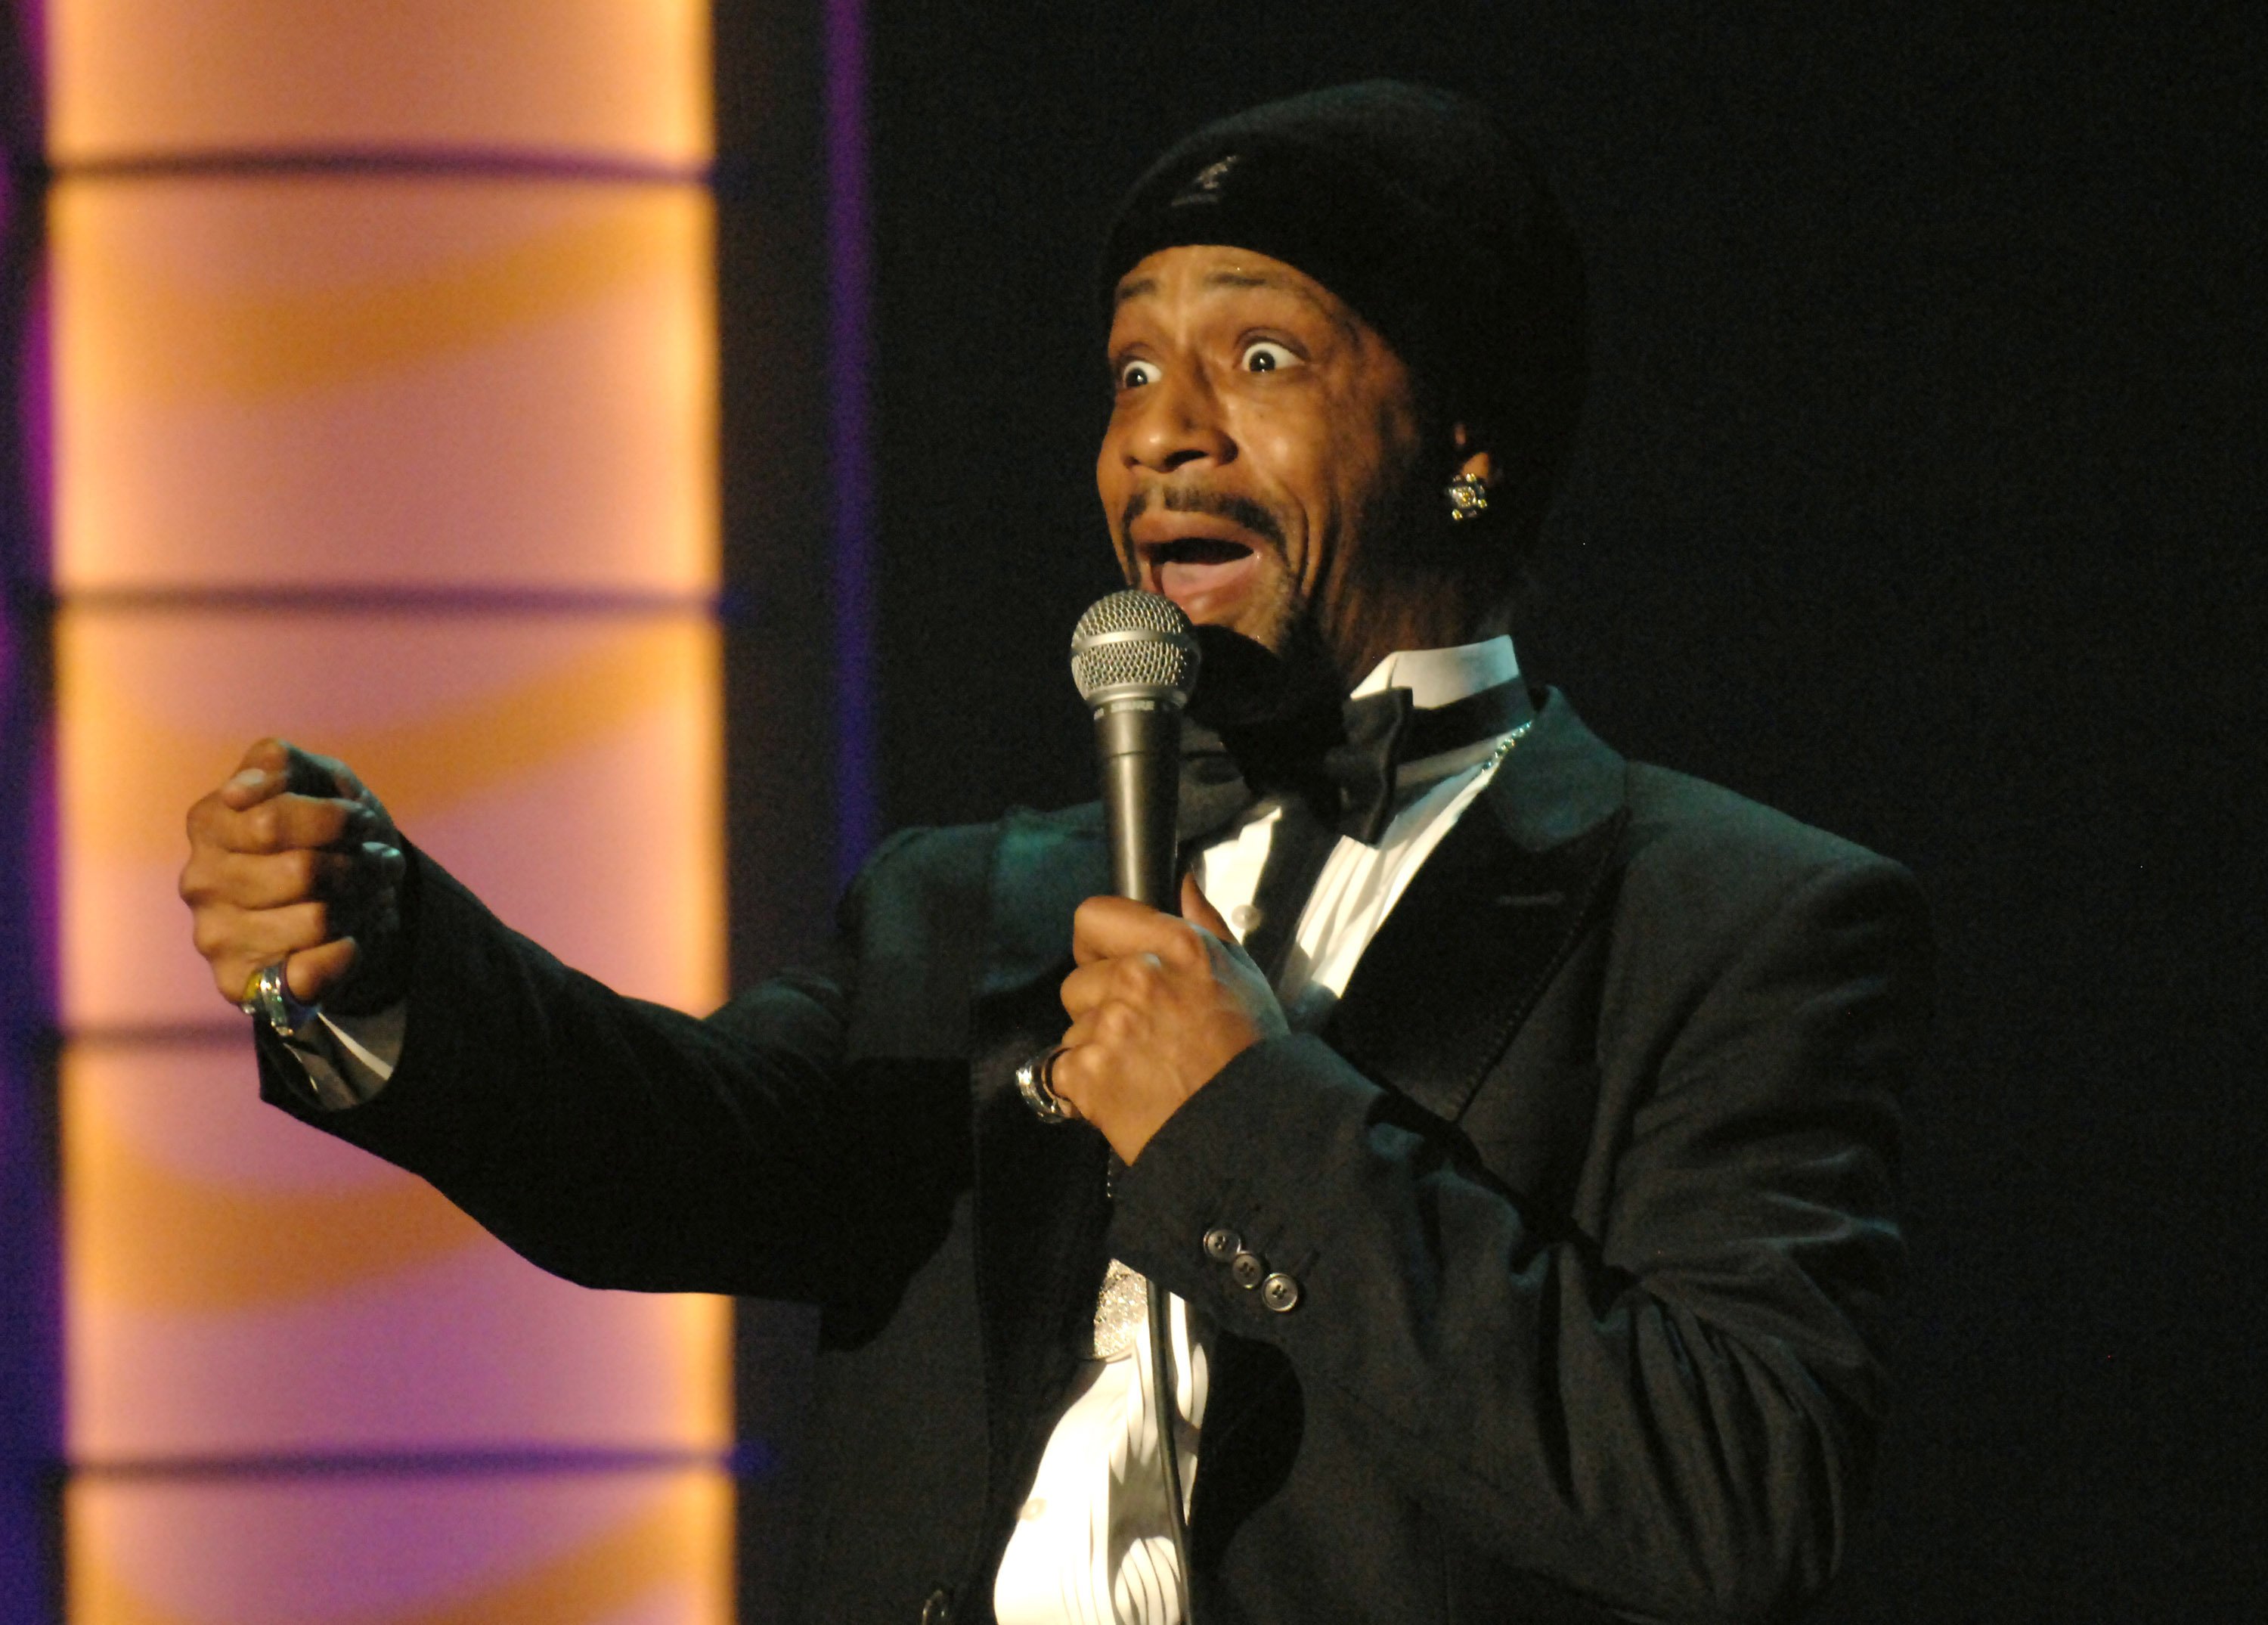 Katt Williams Claims His Own Team Once Ruined His Chances of Winning a Comedy Grammy Award